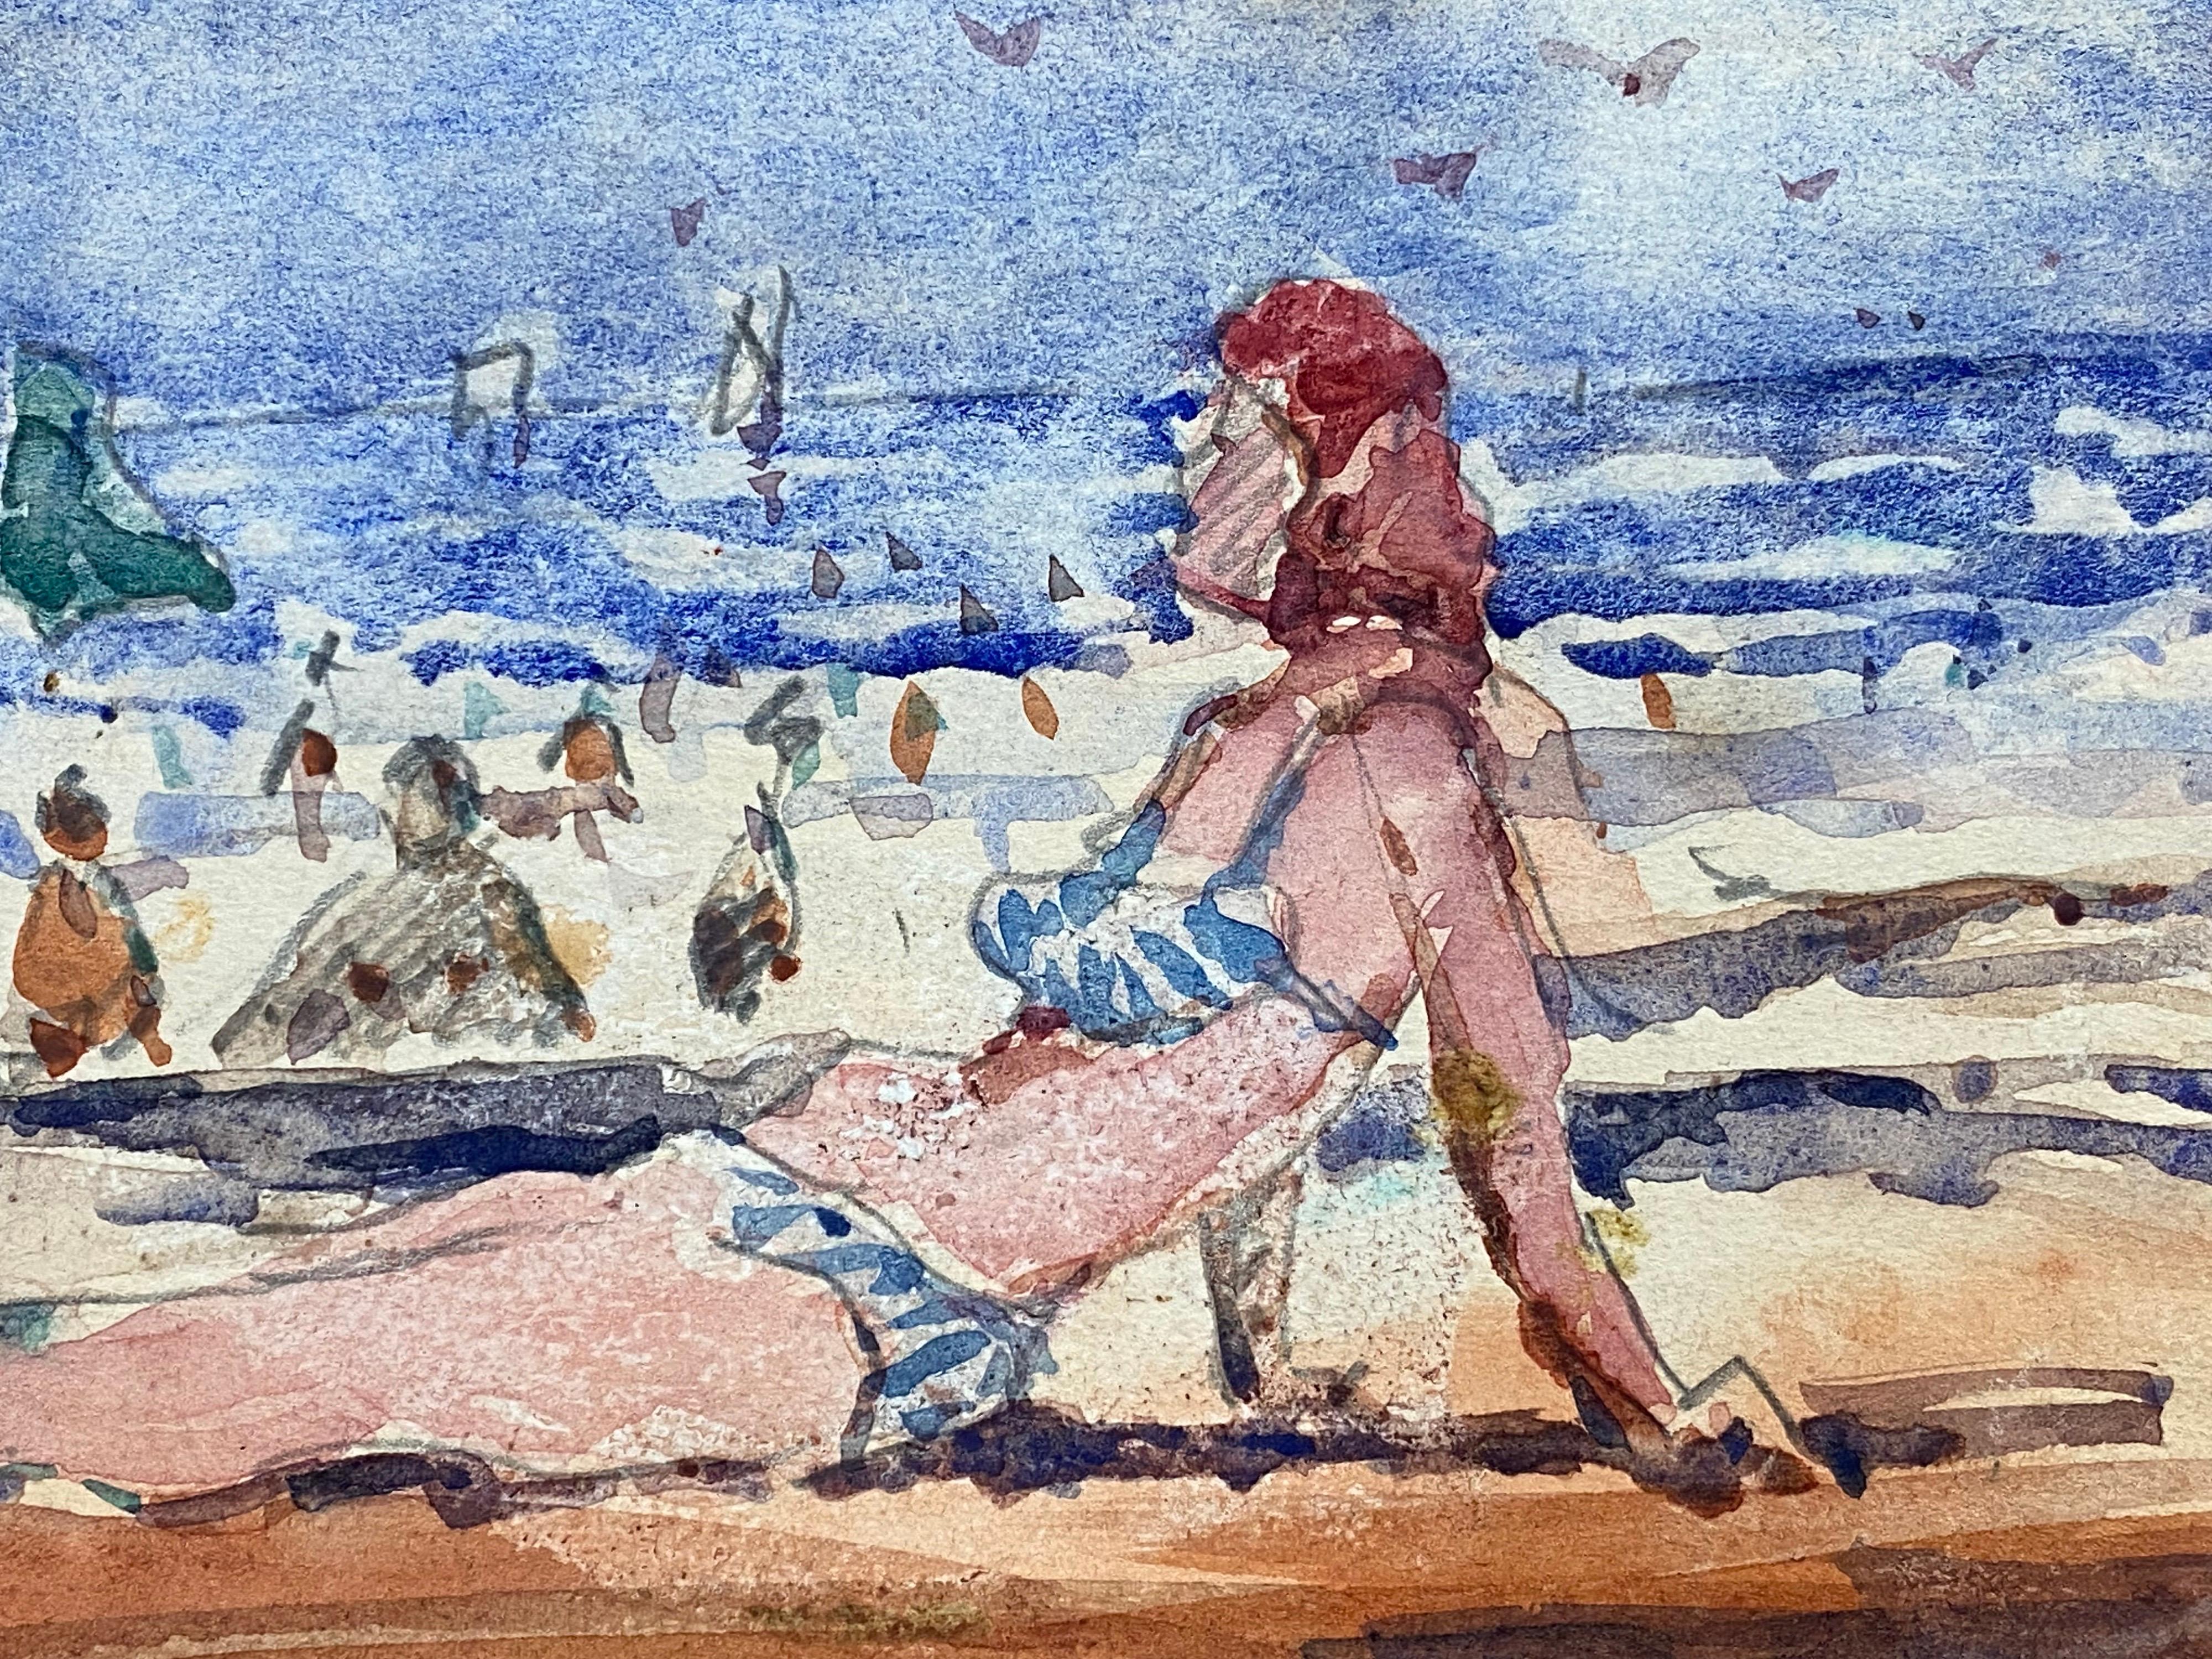 FRENCH IMPRESSIONIST WATERCOLOUR - LADY IN BIKINI SUNBATHING  - Painting by Maurice Mazeilie